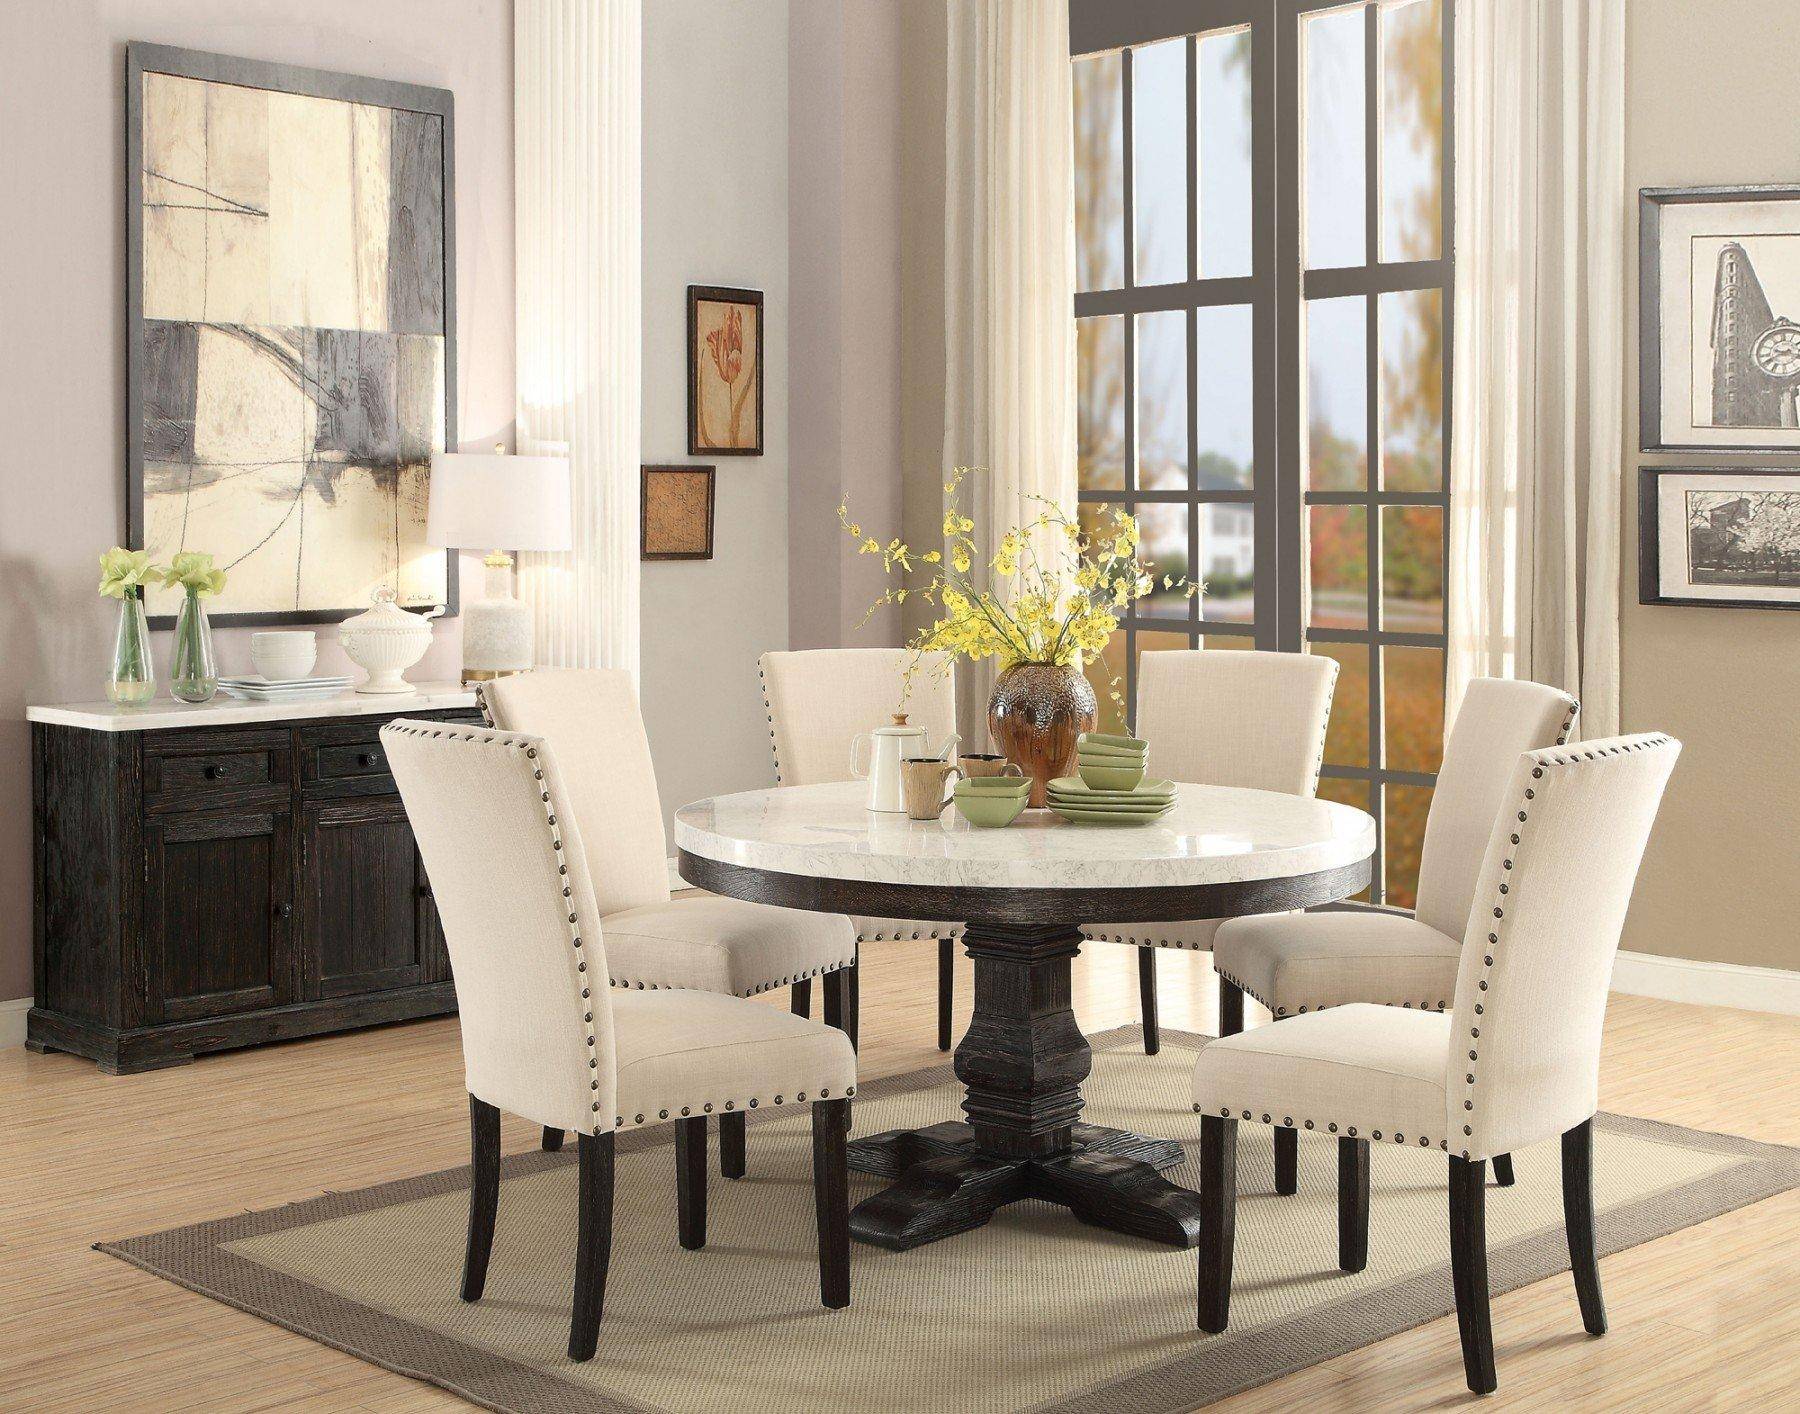 Black Round Dining Room Table With Leaf